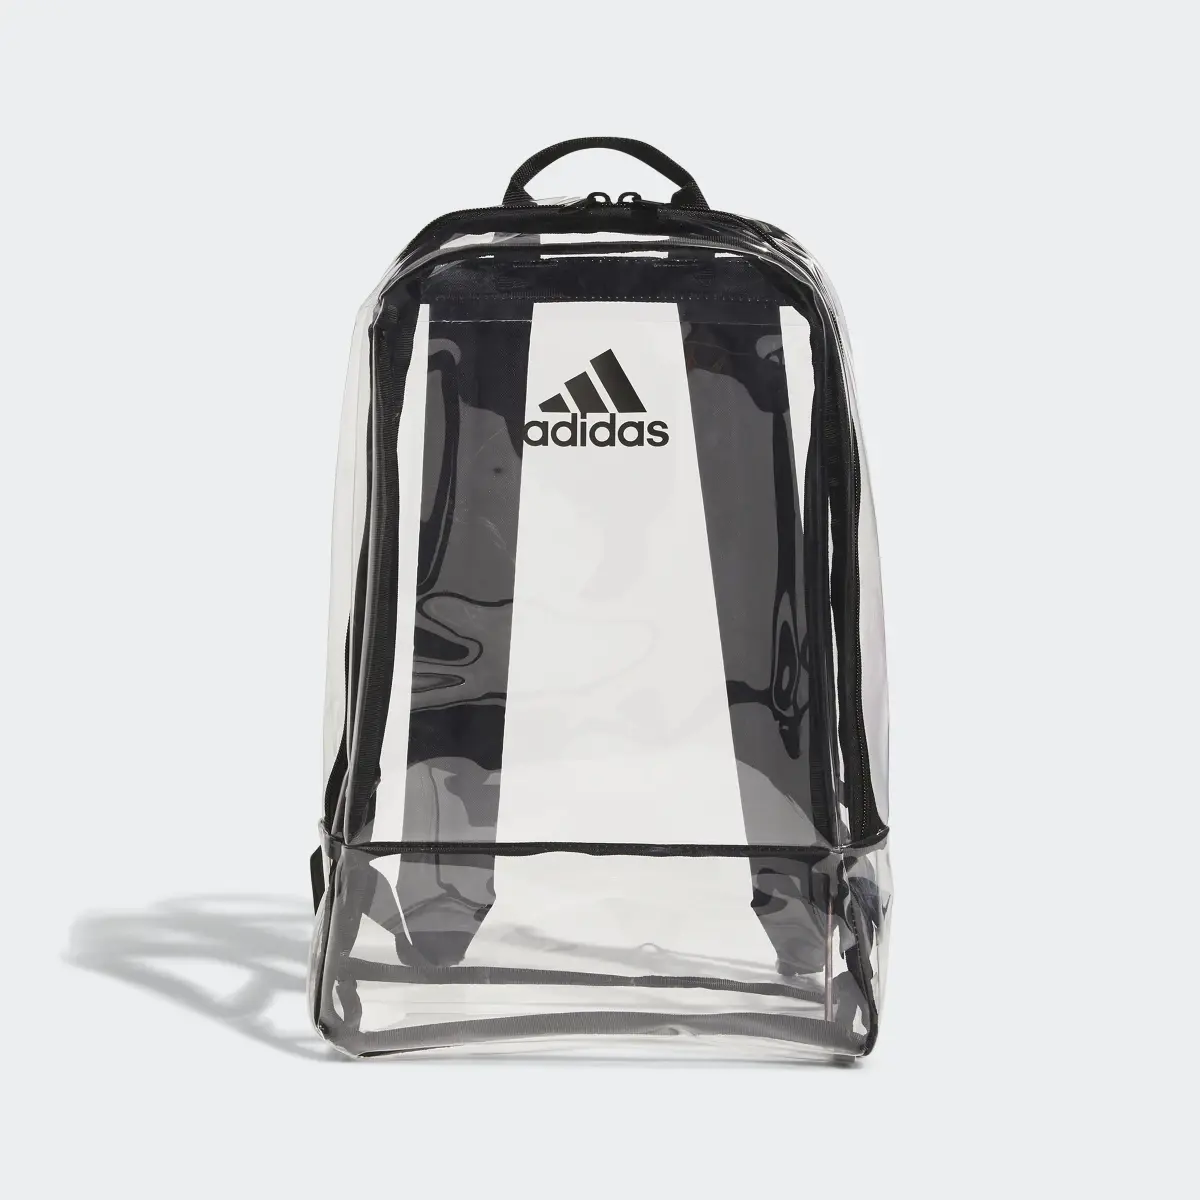 Adidas Clear Backpack. 2